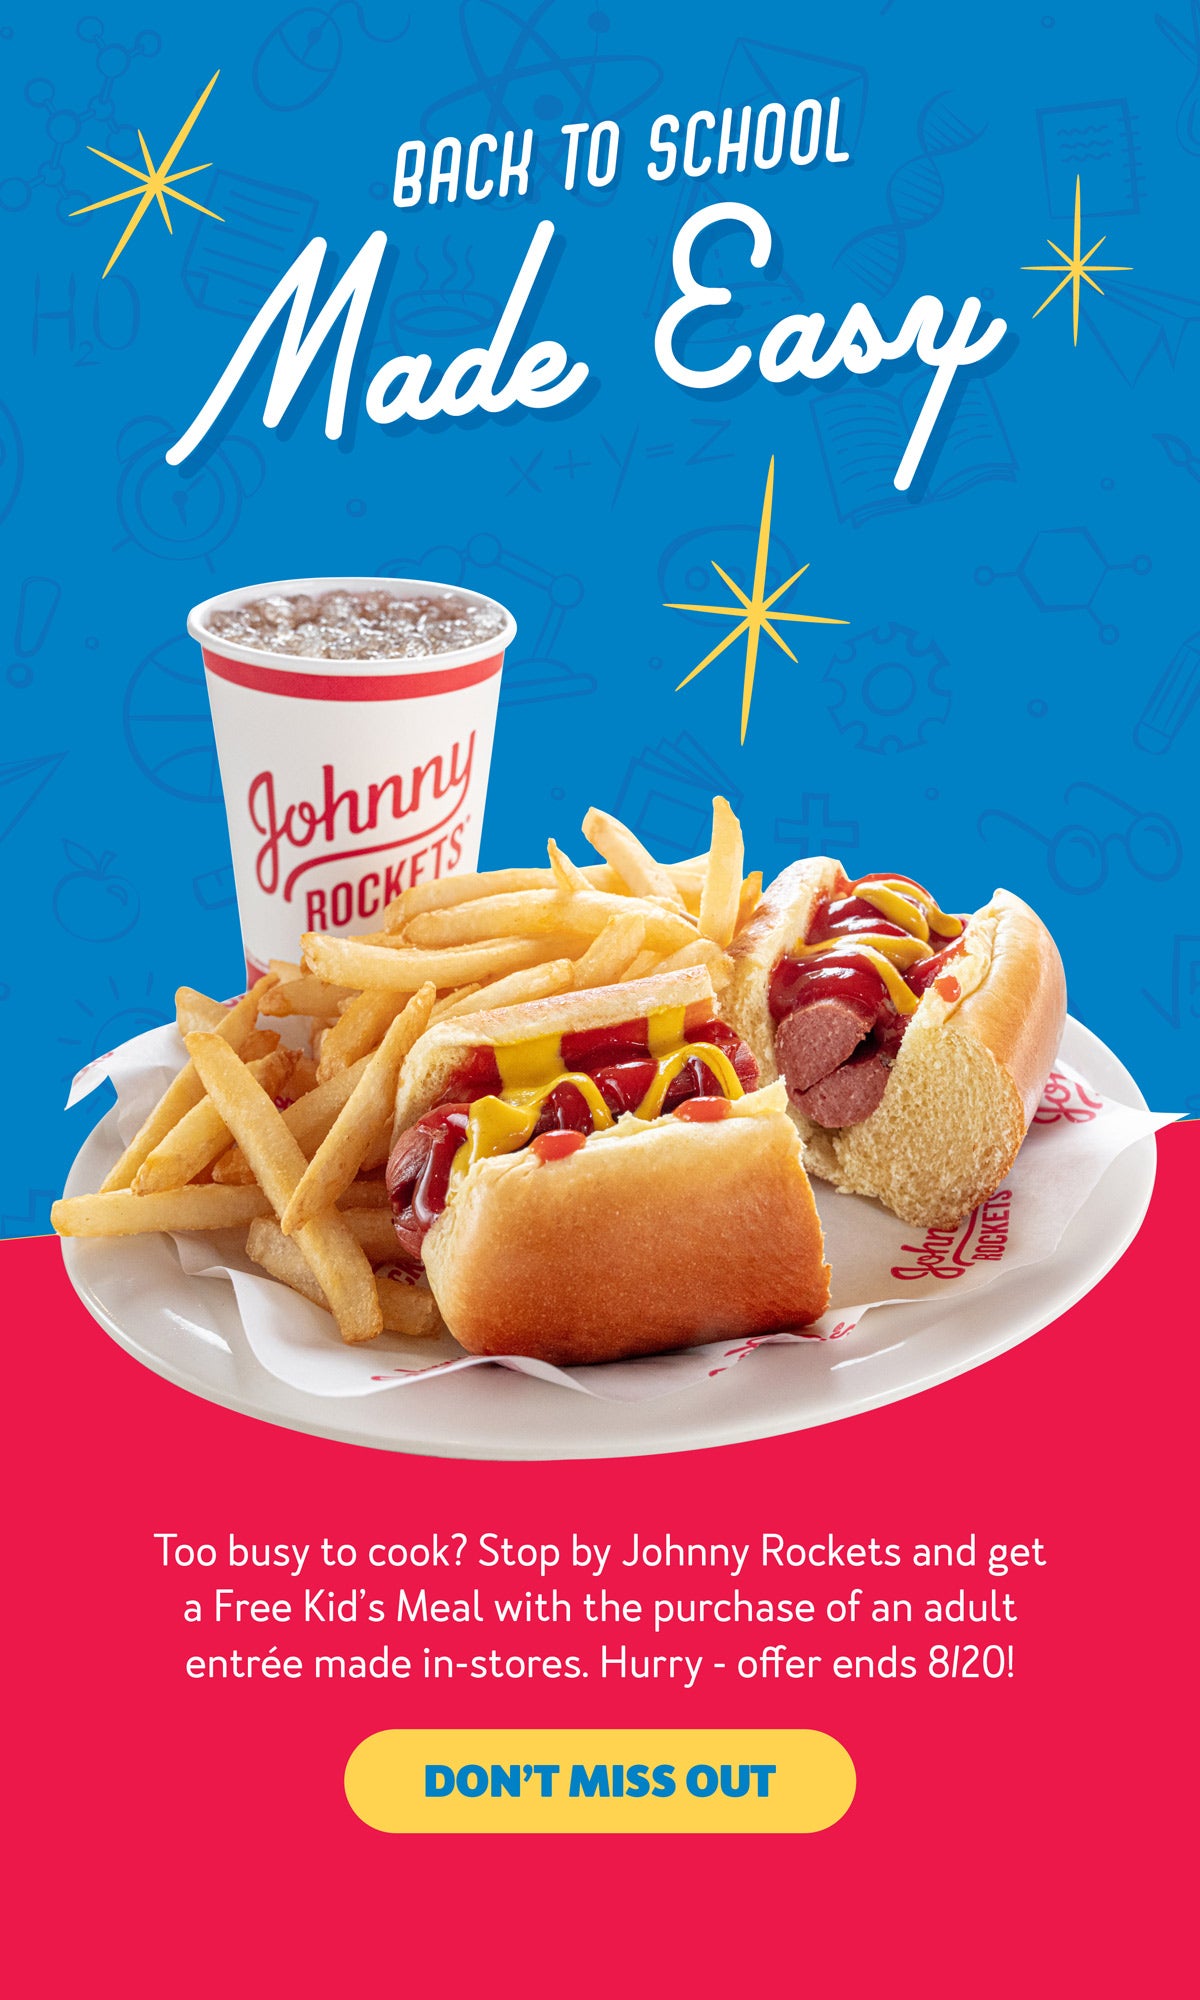 Get a Free Kid's Meal with Adult Entree Purchase